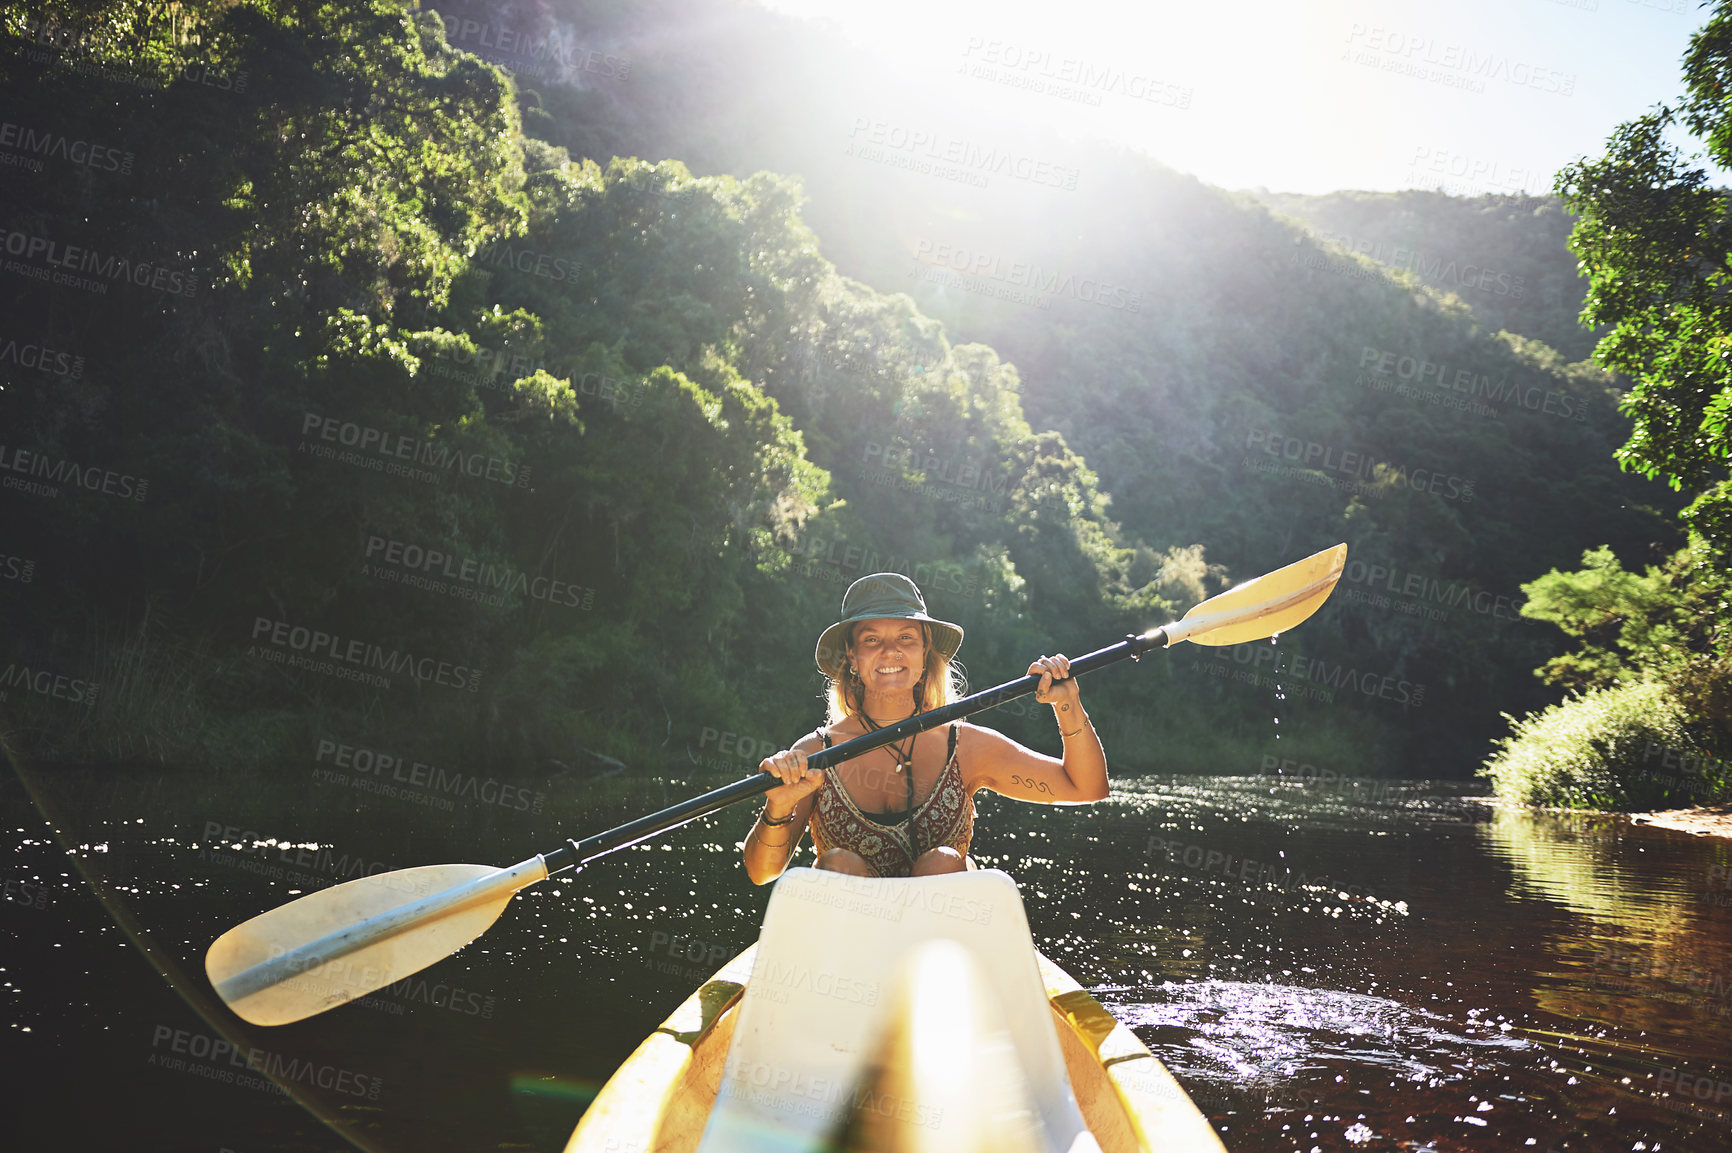 Buy stock photo Shot of a young woman out kayaking on a lake